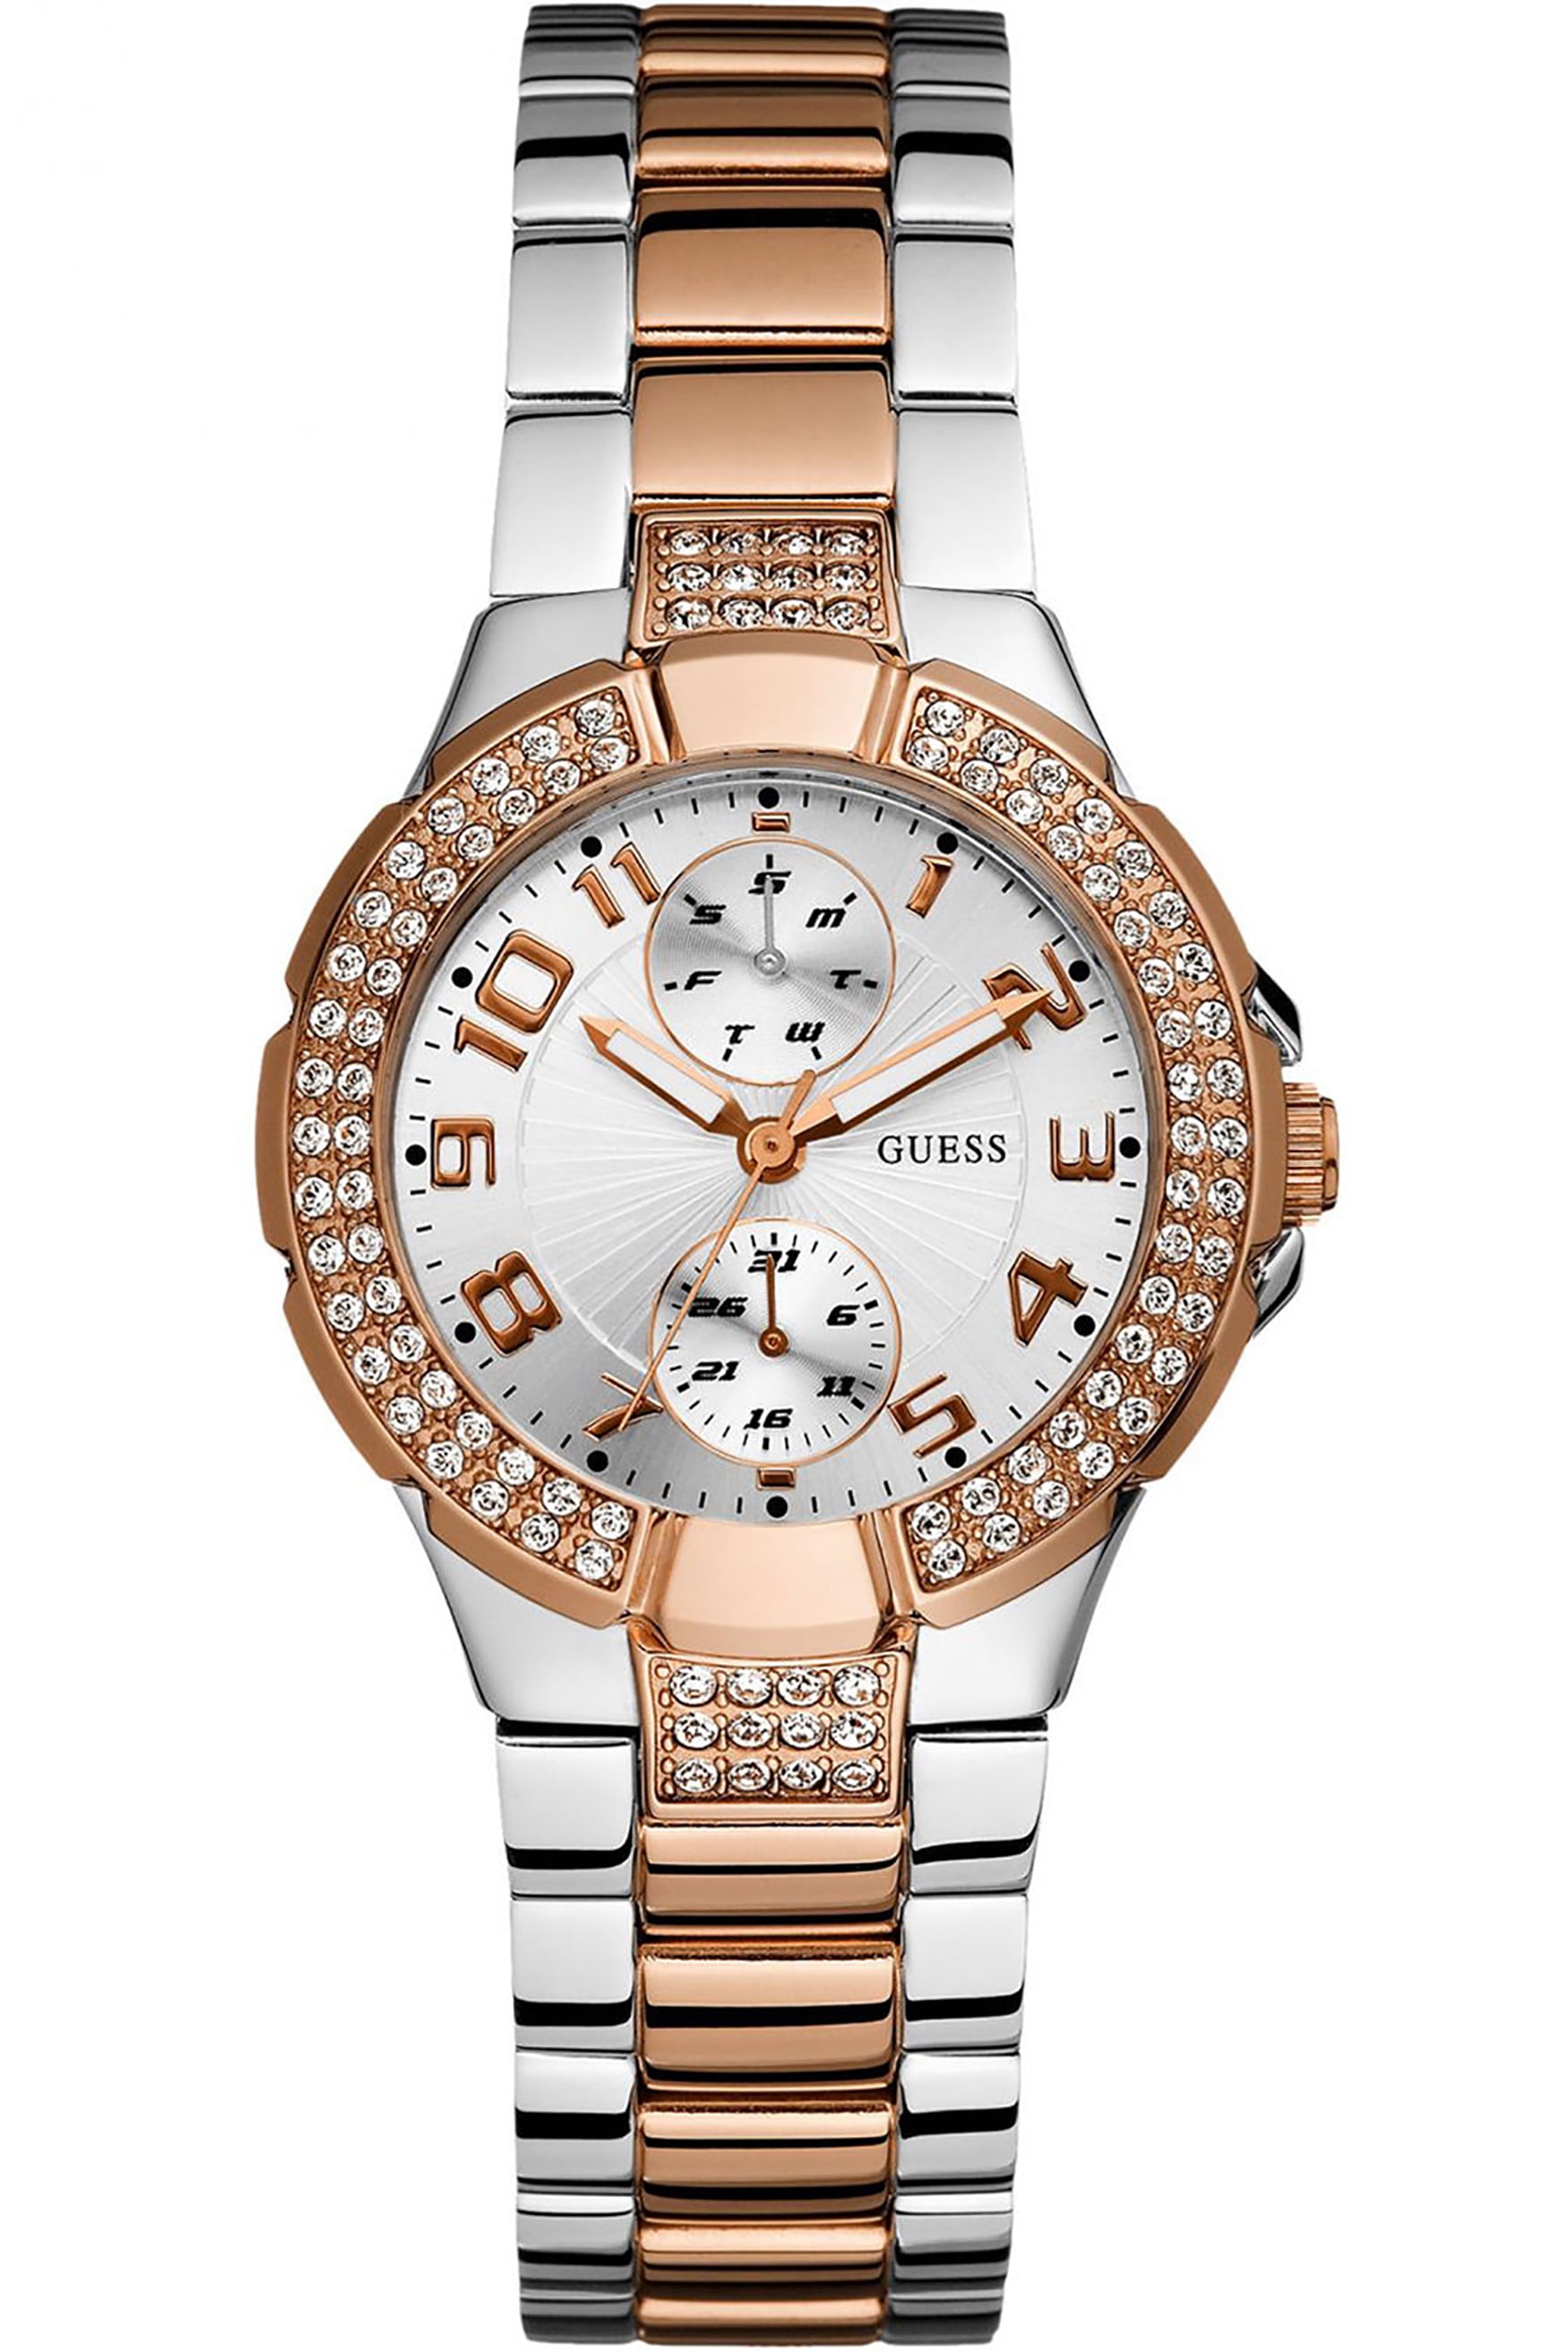 GUESS Women's STEEL W15072L2,multi-function,Rose Gold-Tone and Steel ...